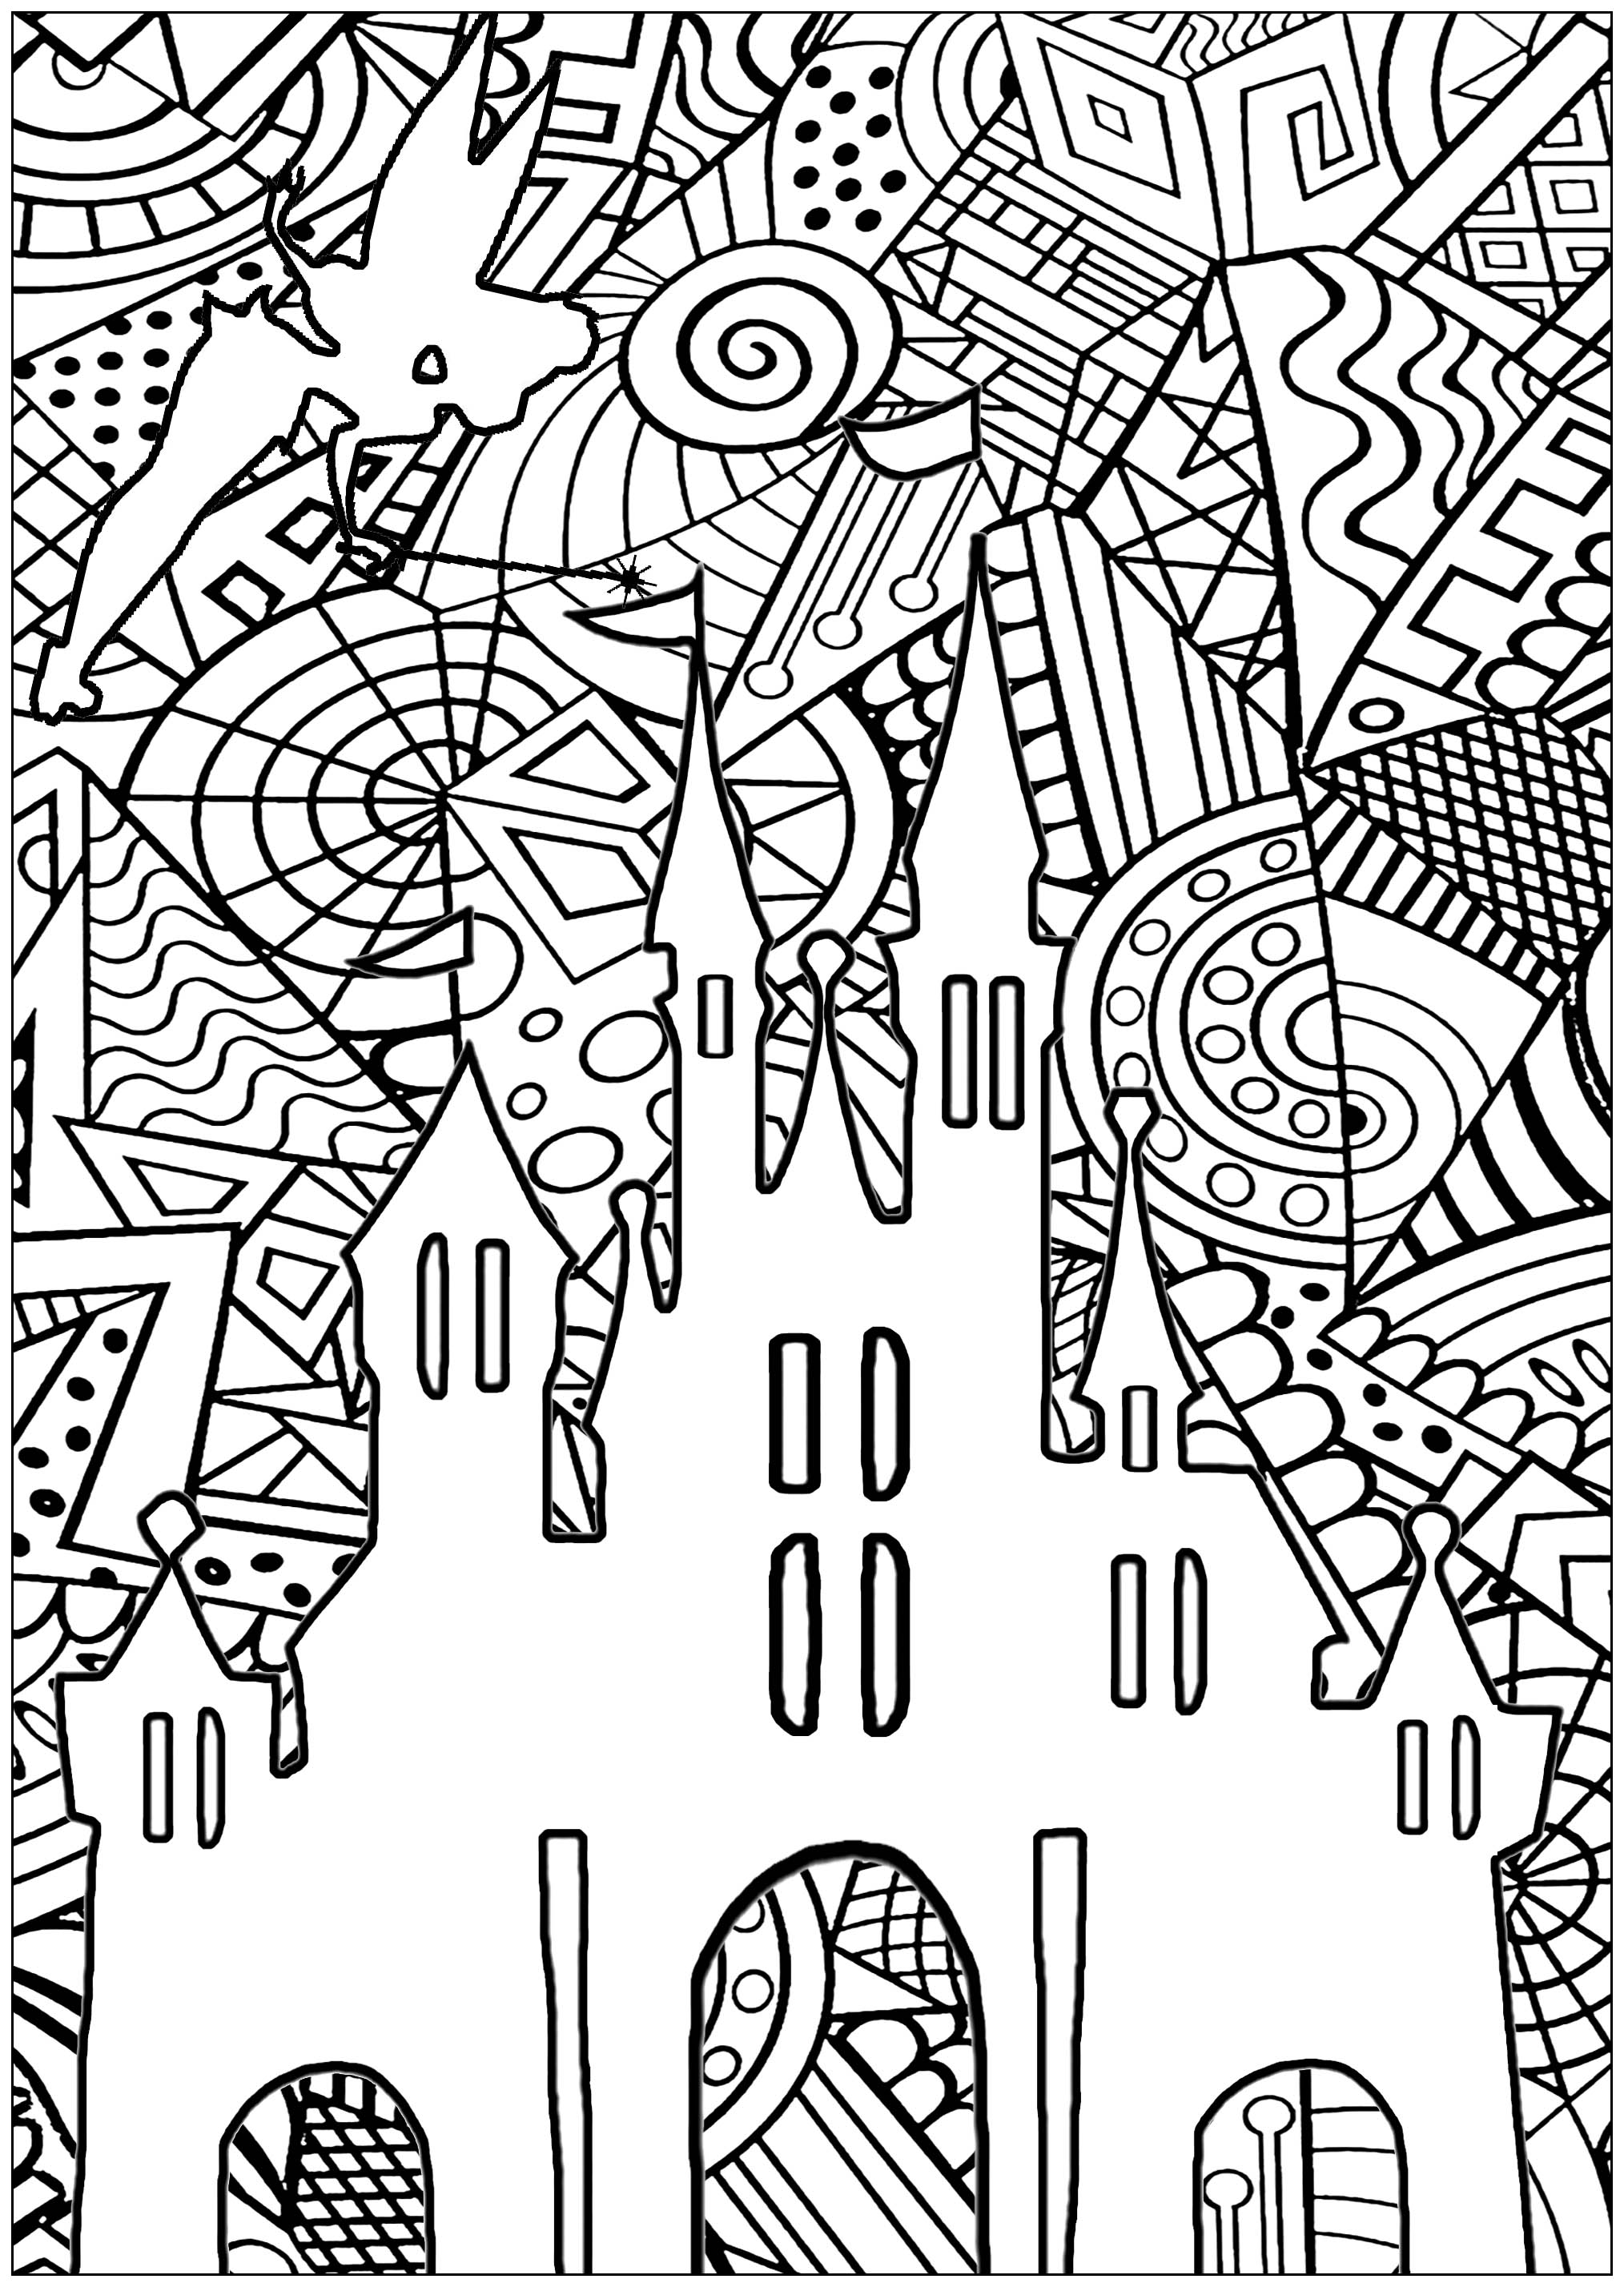 Download Disney castle - Return to childhood Adult Coloring Pages